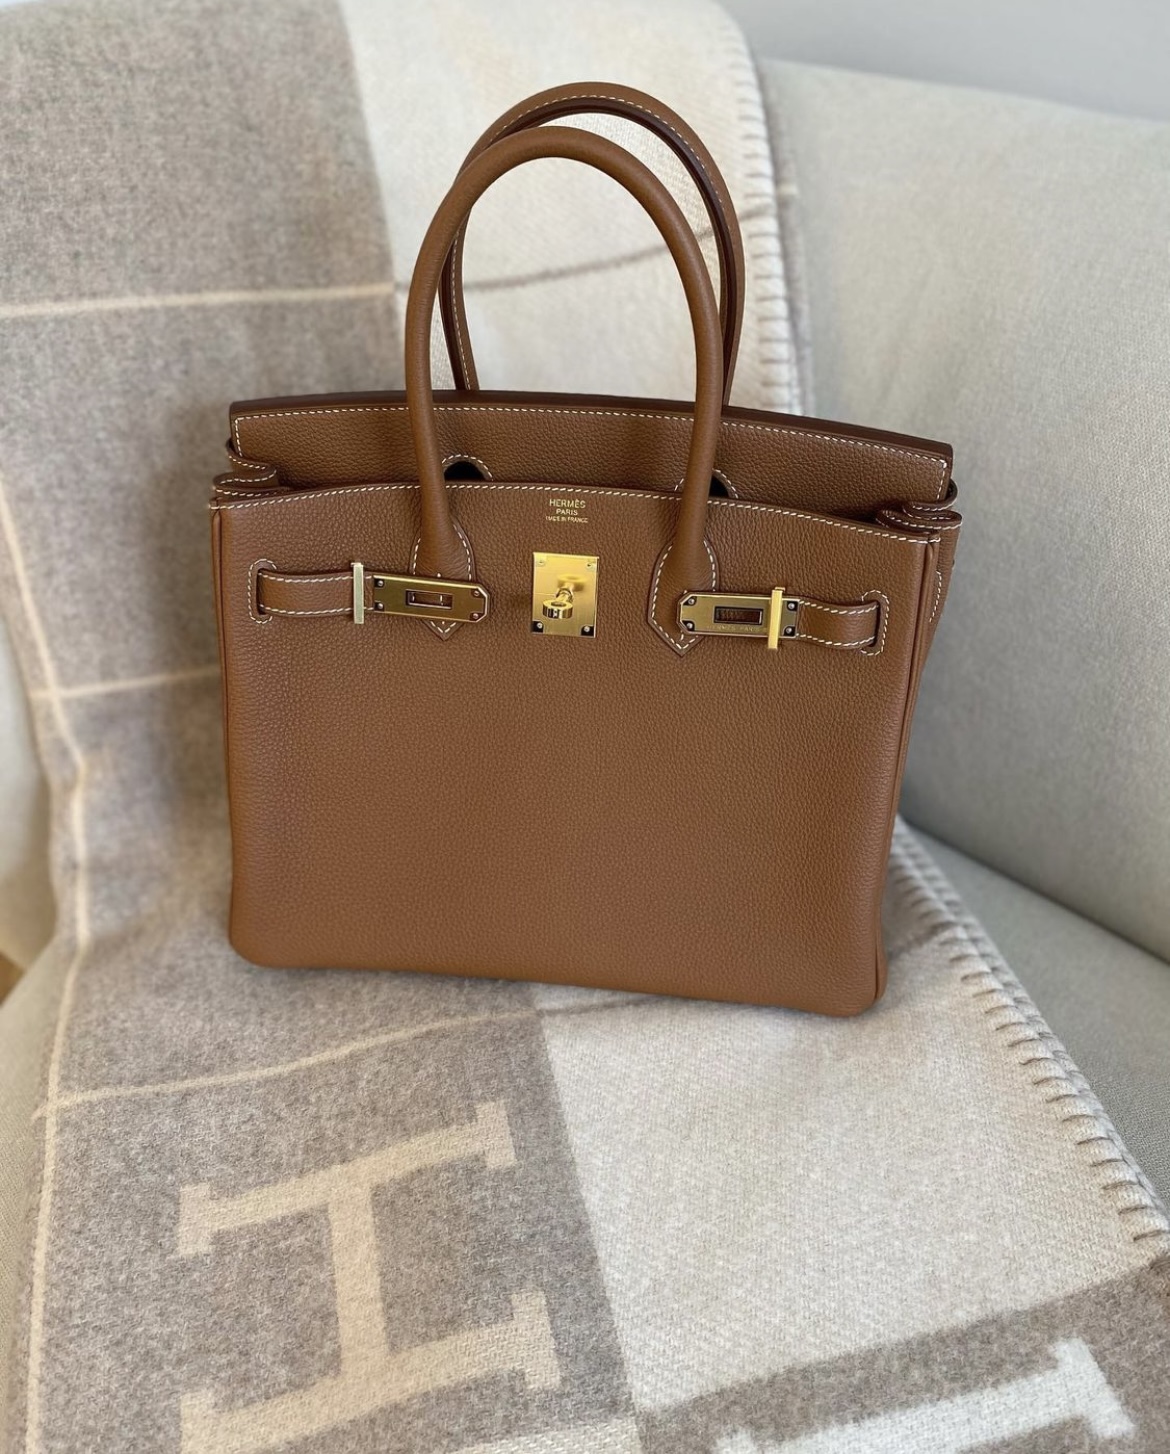 32 How to wear a Hermes Kelly ideas